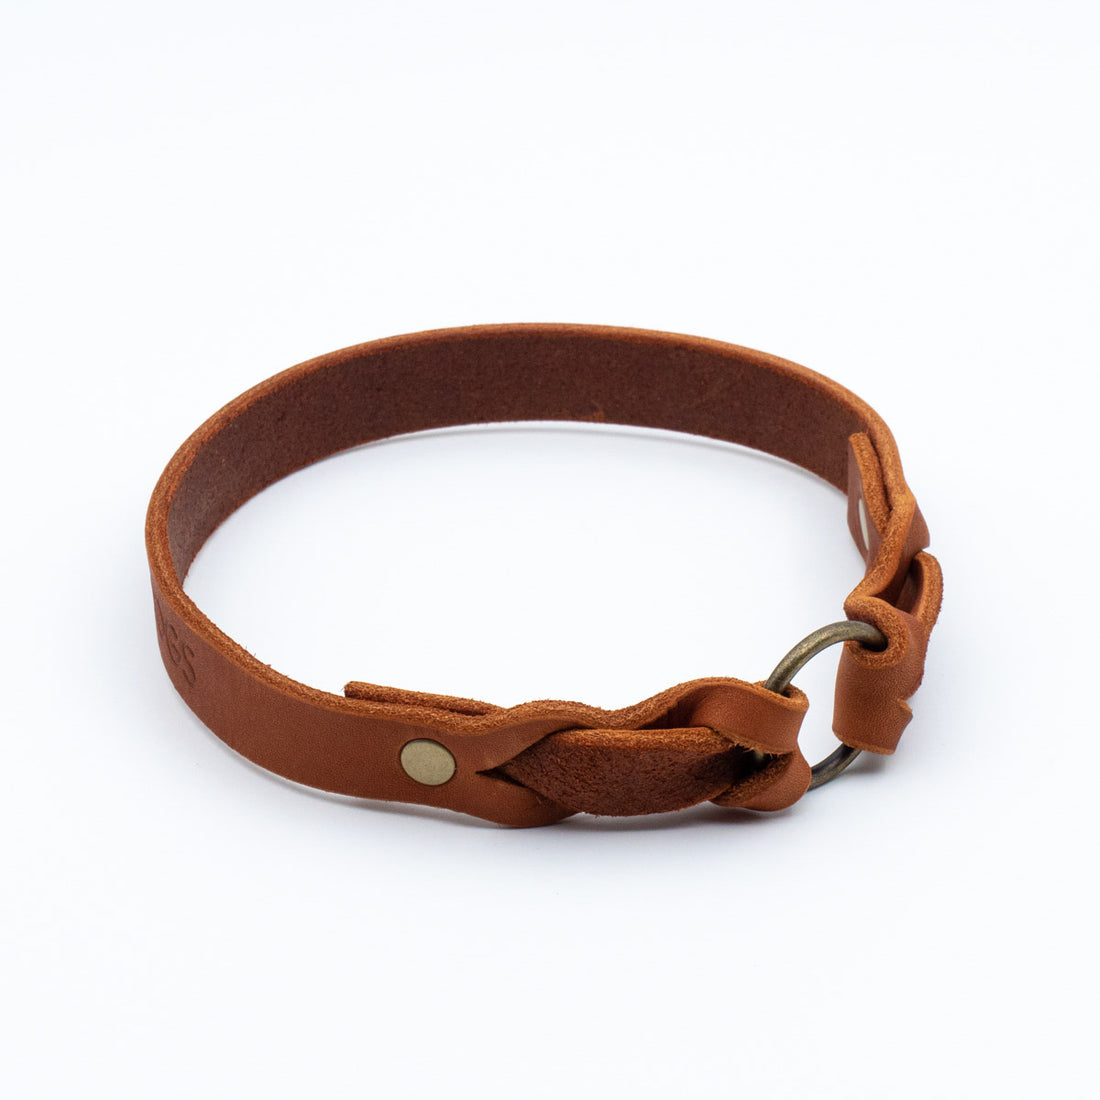 Dog tag strap - greased leather - brown